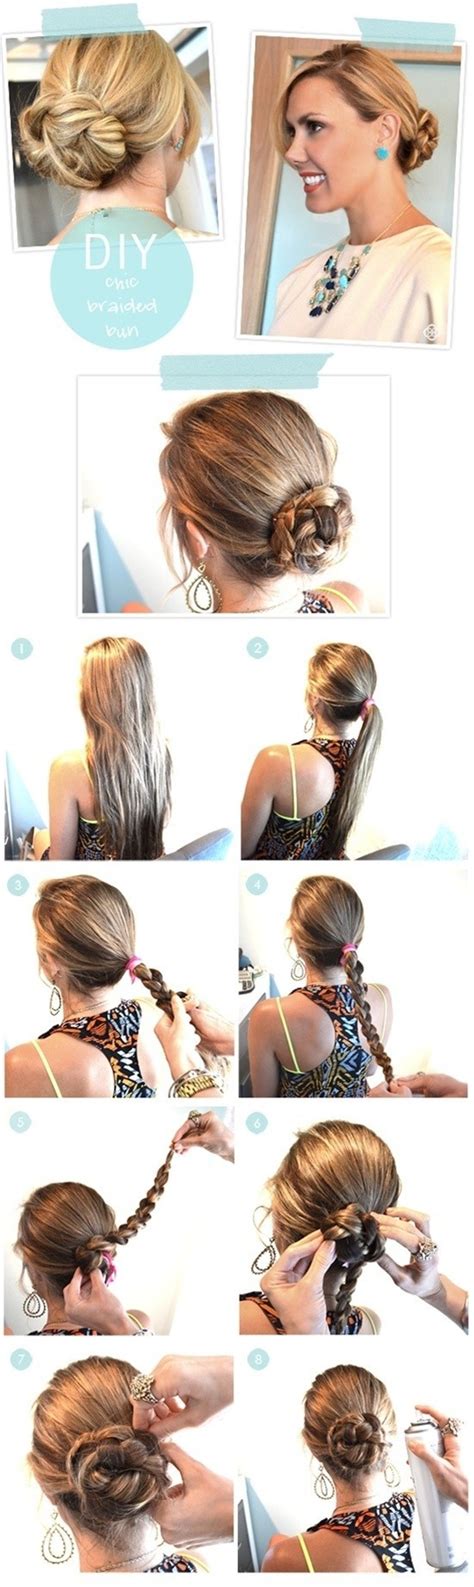 Pair them with colorful skirts and floral dresses! 15 Beautiful Long Hairstyles with Tutorials - Pretty Designs